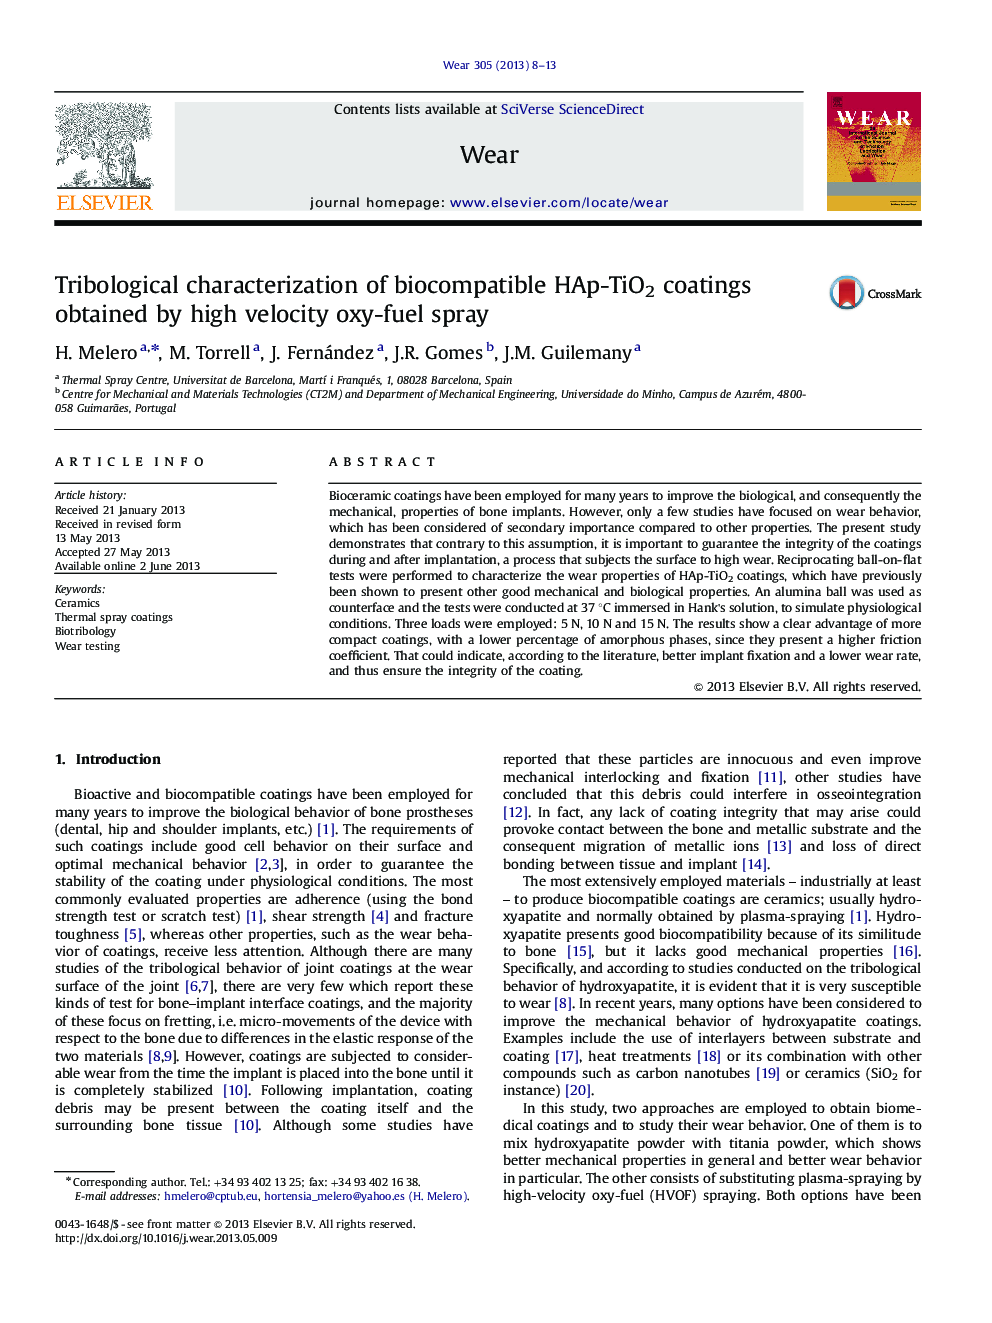 Tribological characterization of biocompatible HAp-TiO2 coatings obtained by high velocity oxy-fuel spray